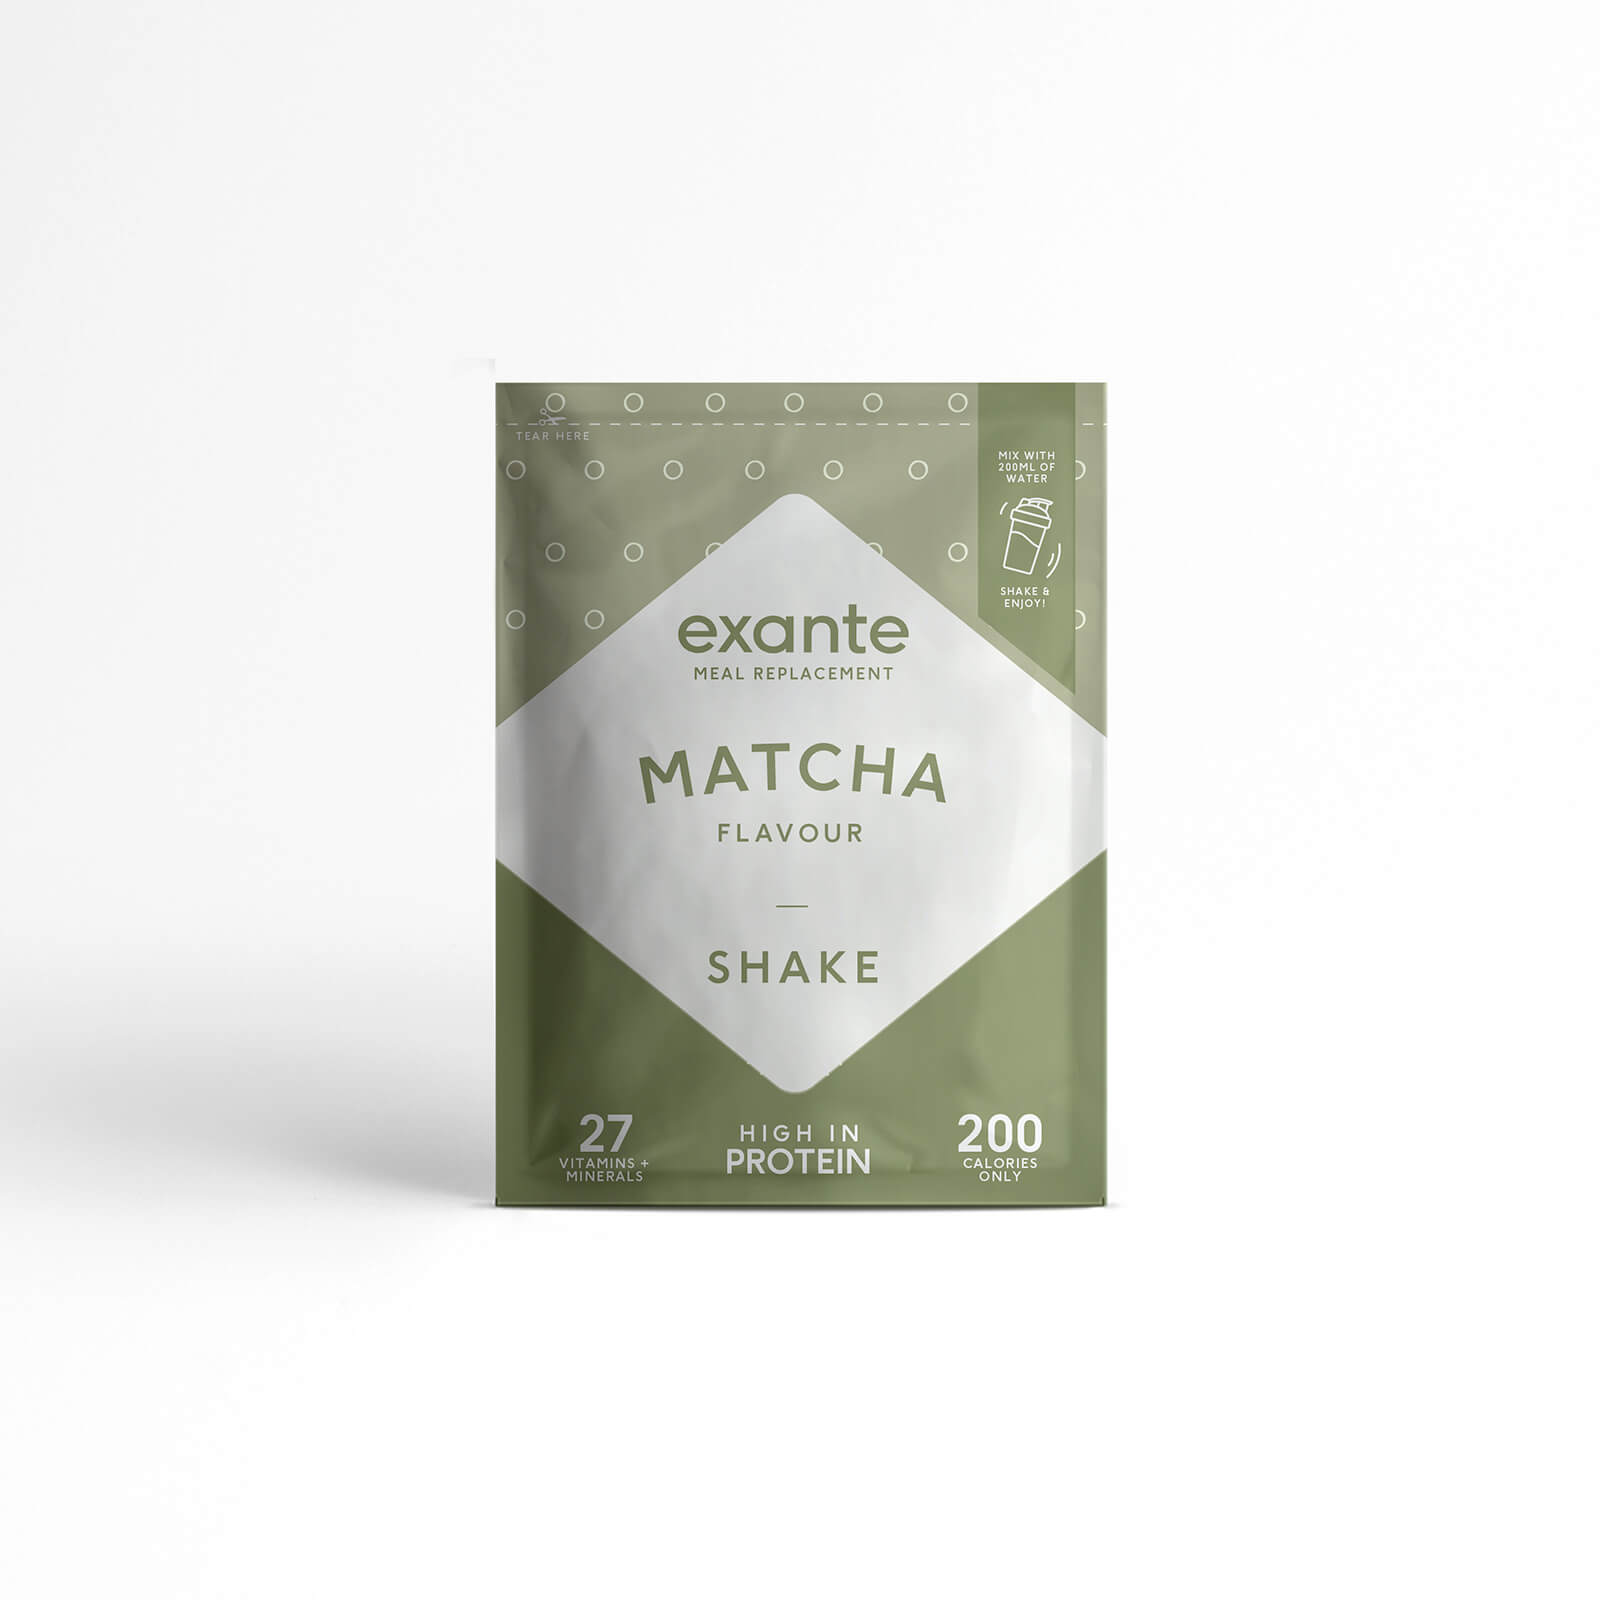 Exante Diet Meal Replacement Box of 7 Matcha Shake